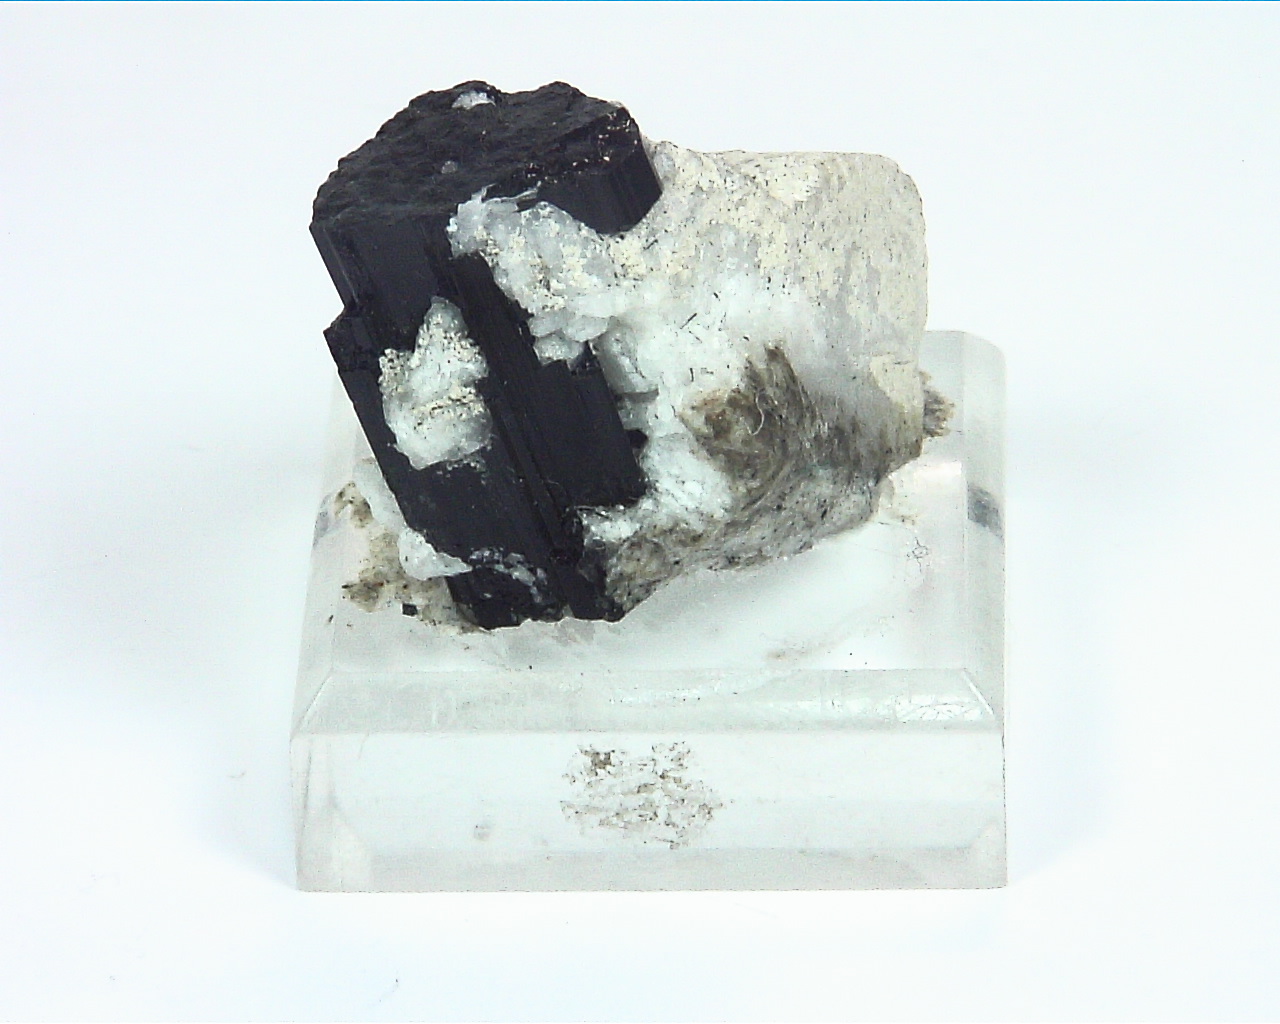 Quarts Crystal with Black Tourmaline Crystals,MS,786 6